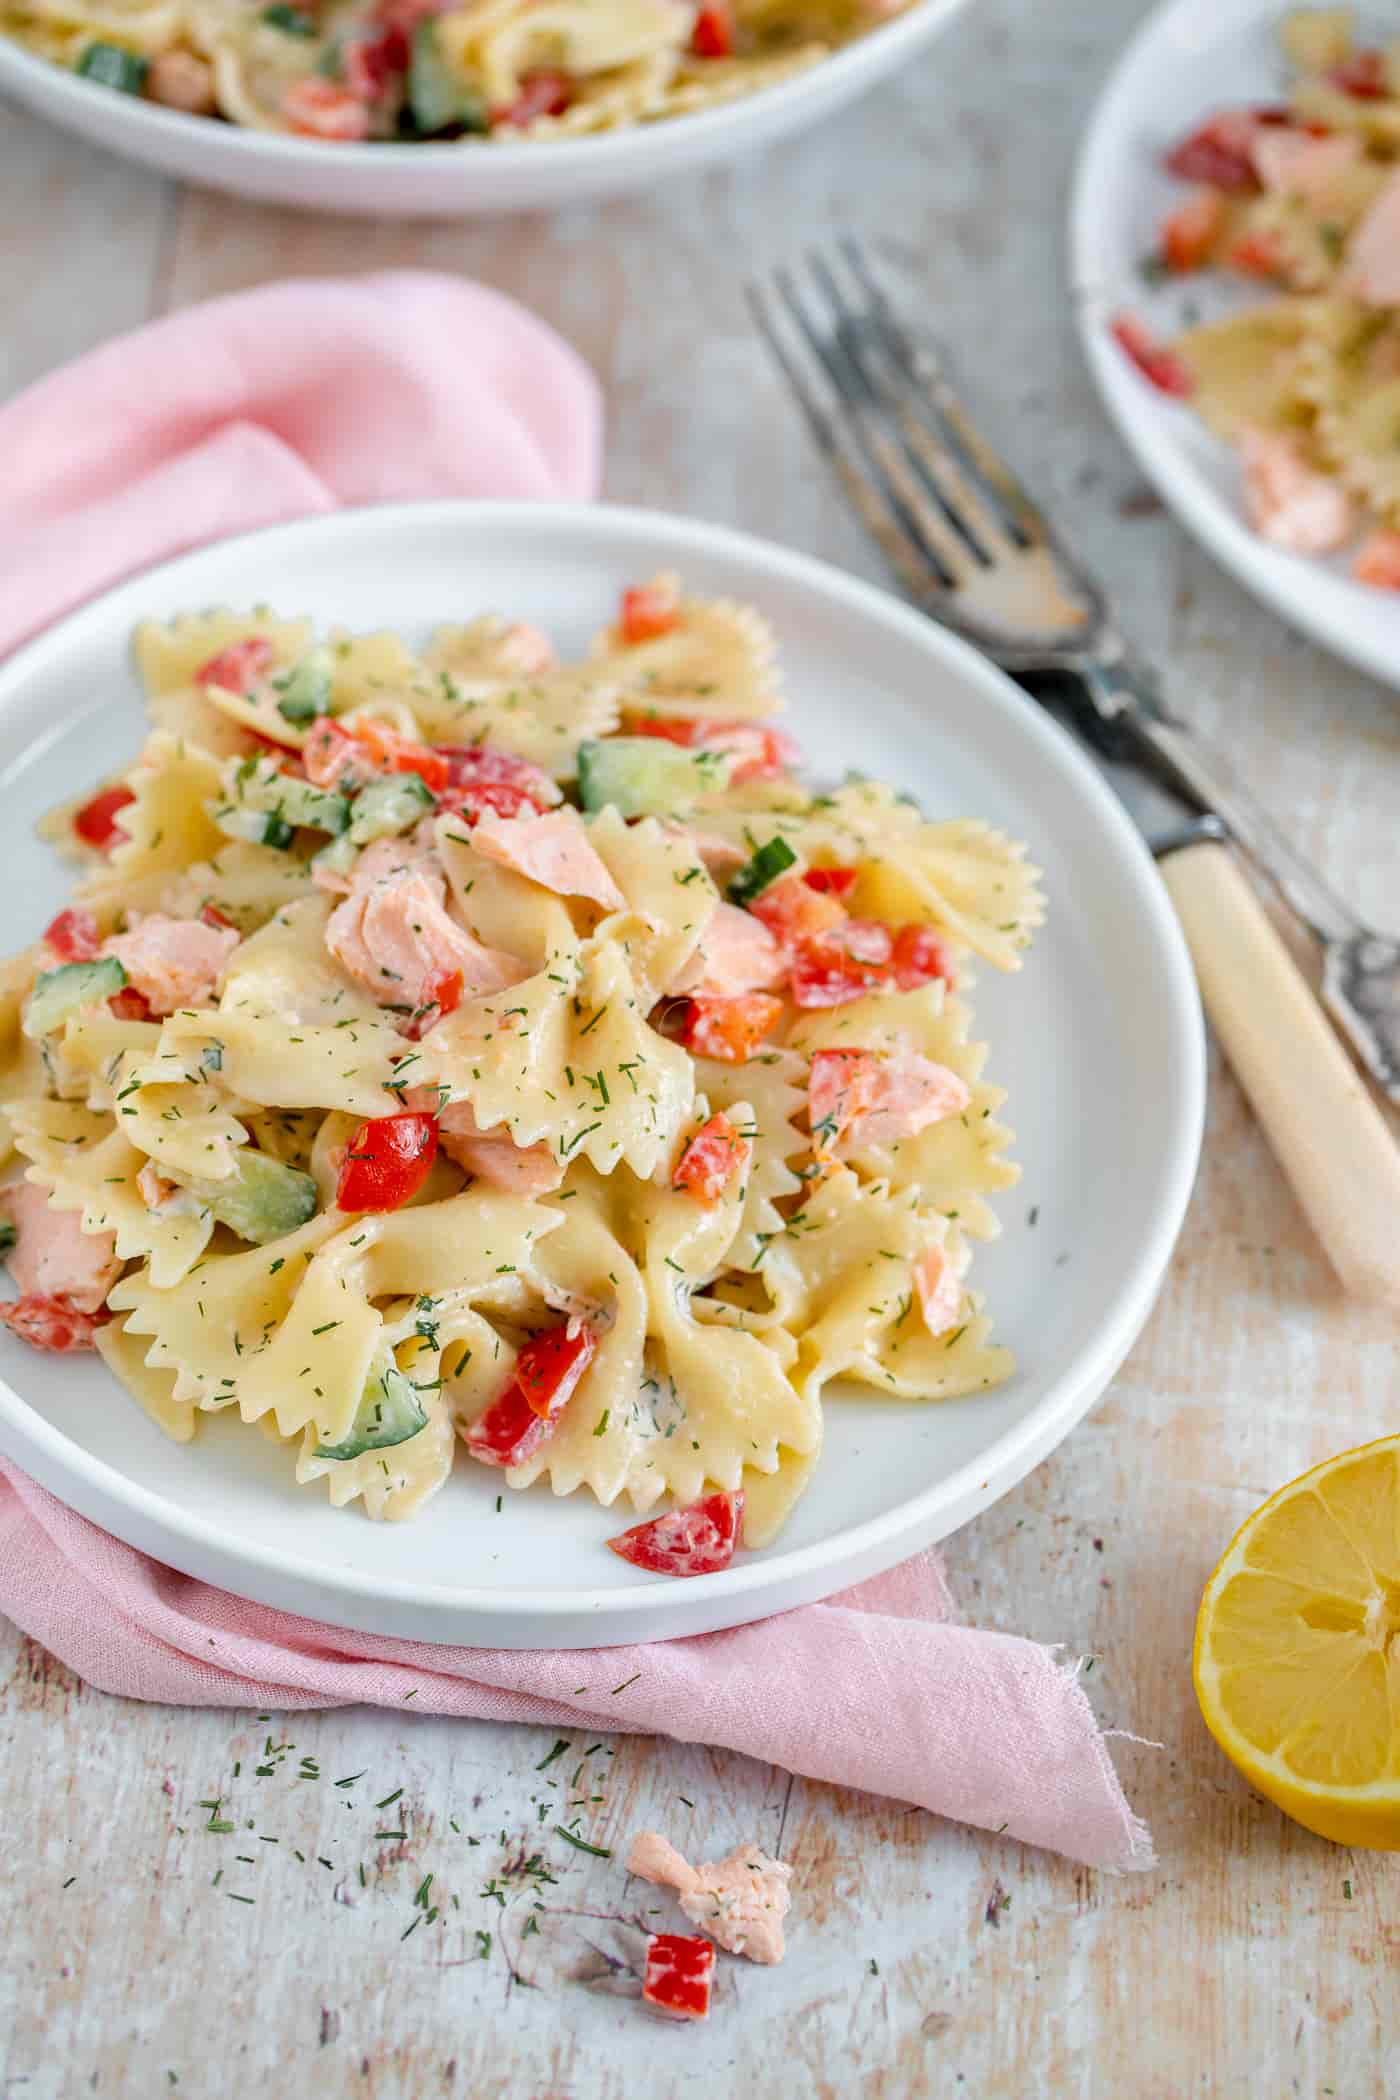 salmon pasta salad on a white plate sat on a pink napkin. A knife and fork sit to the side on an anglewith a lemon half and a corner of another 2 plates of salmon pasta salad just visible in the top right corner and the top left corner